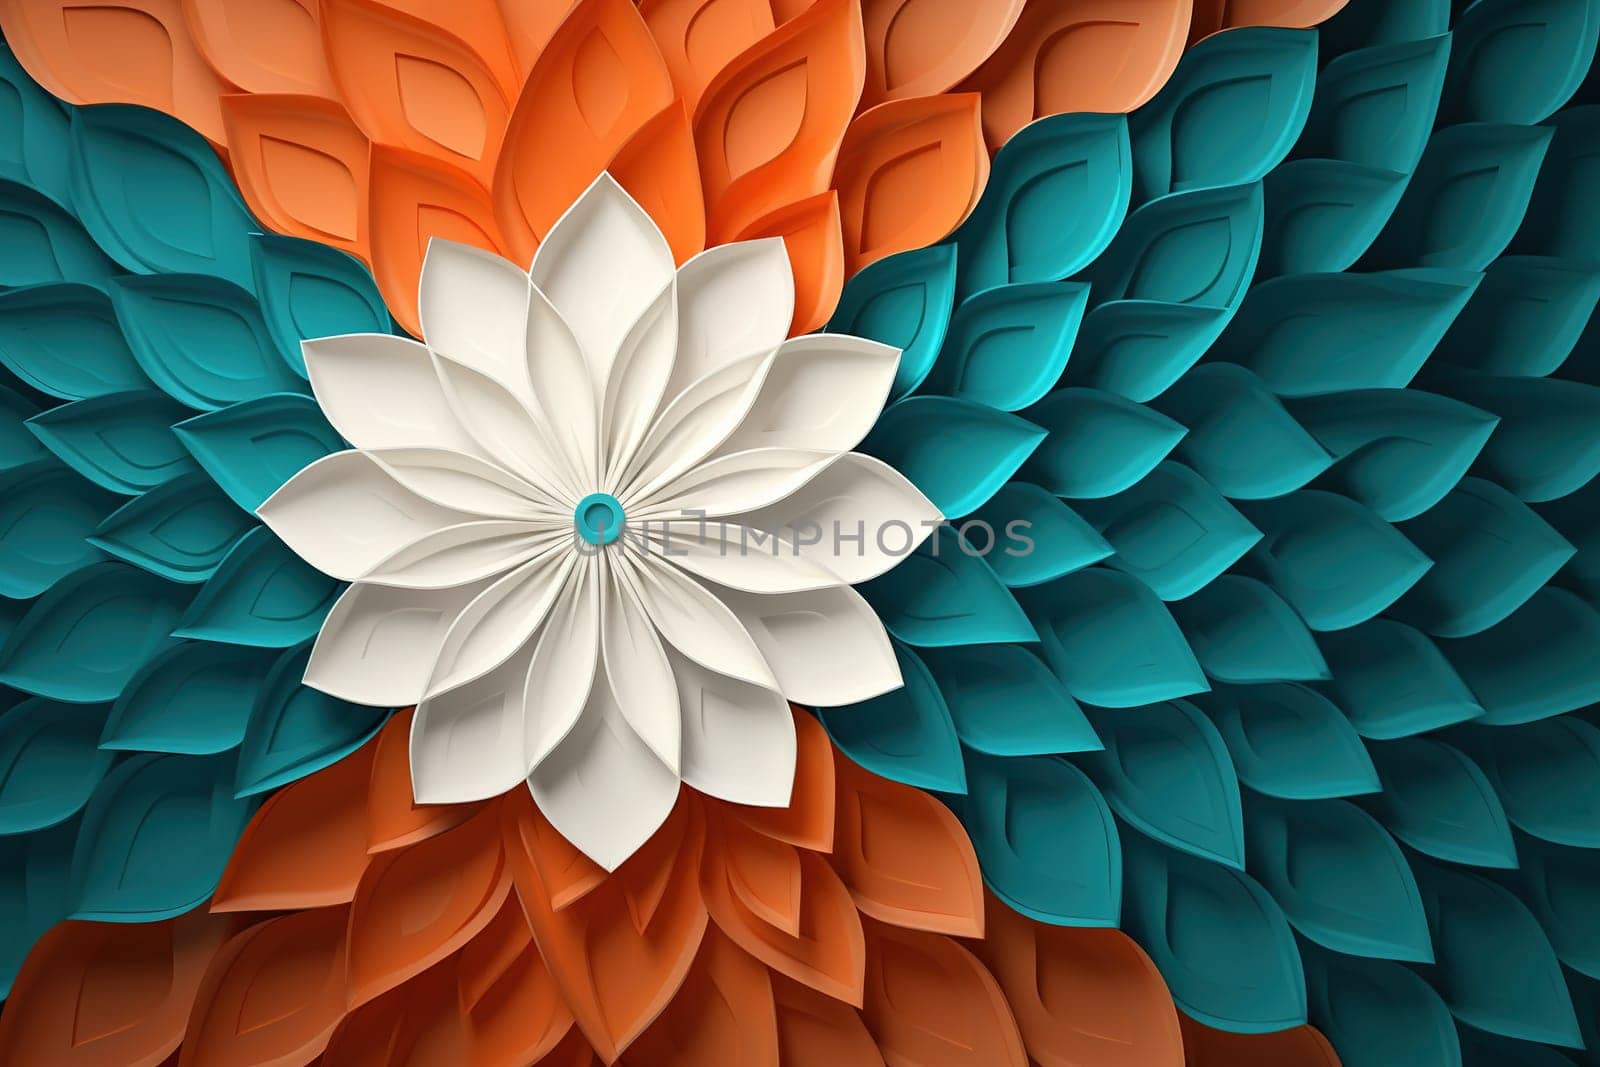 Vibrant abstract design representing the Indian Independence Day, featuring stylized white flower in the center with petals in the colors of the Indian flag: saffron, white, and green. Generative AI